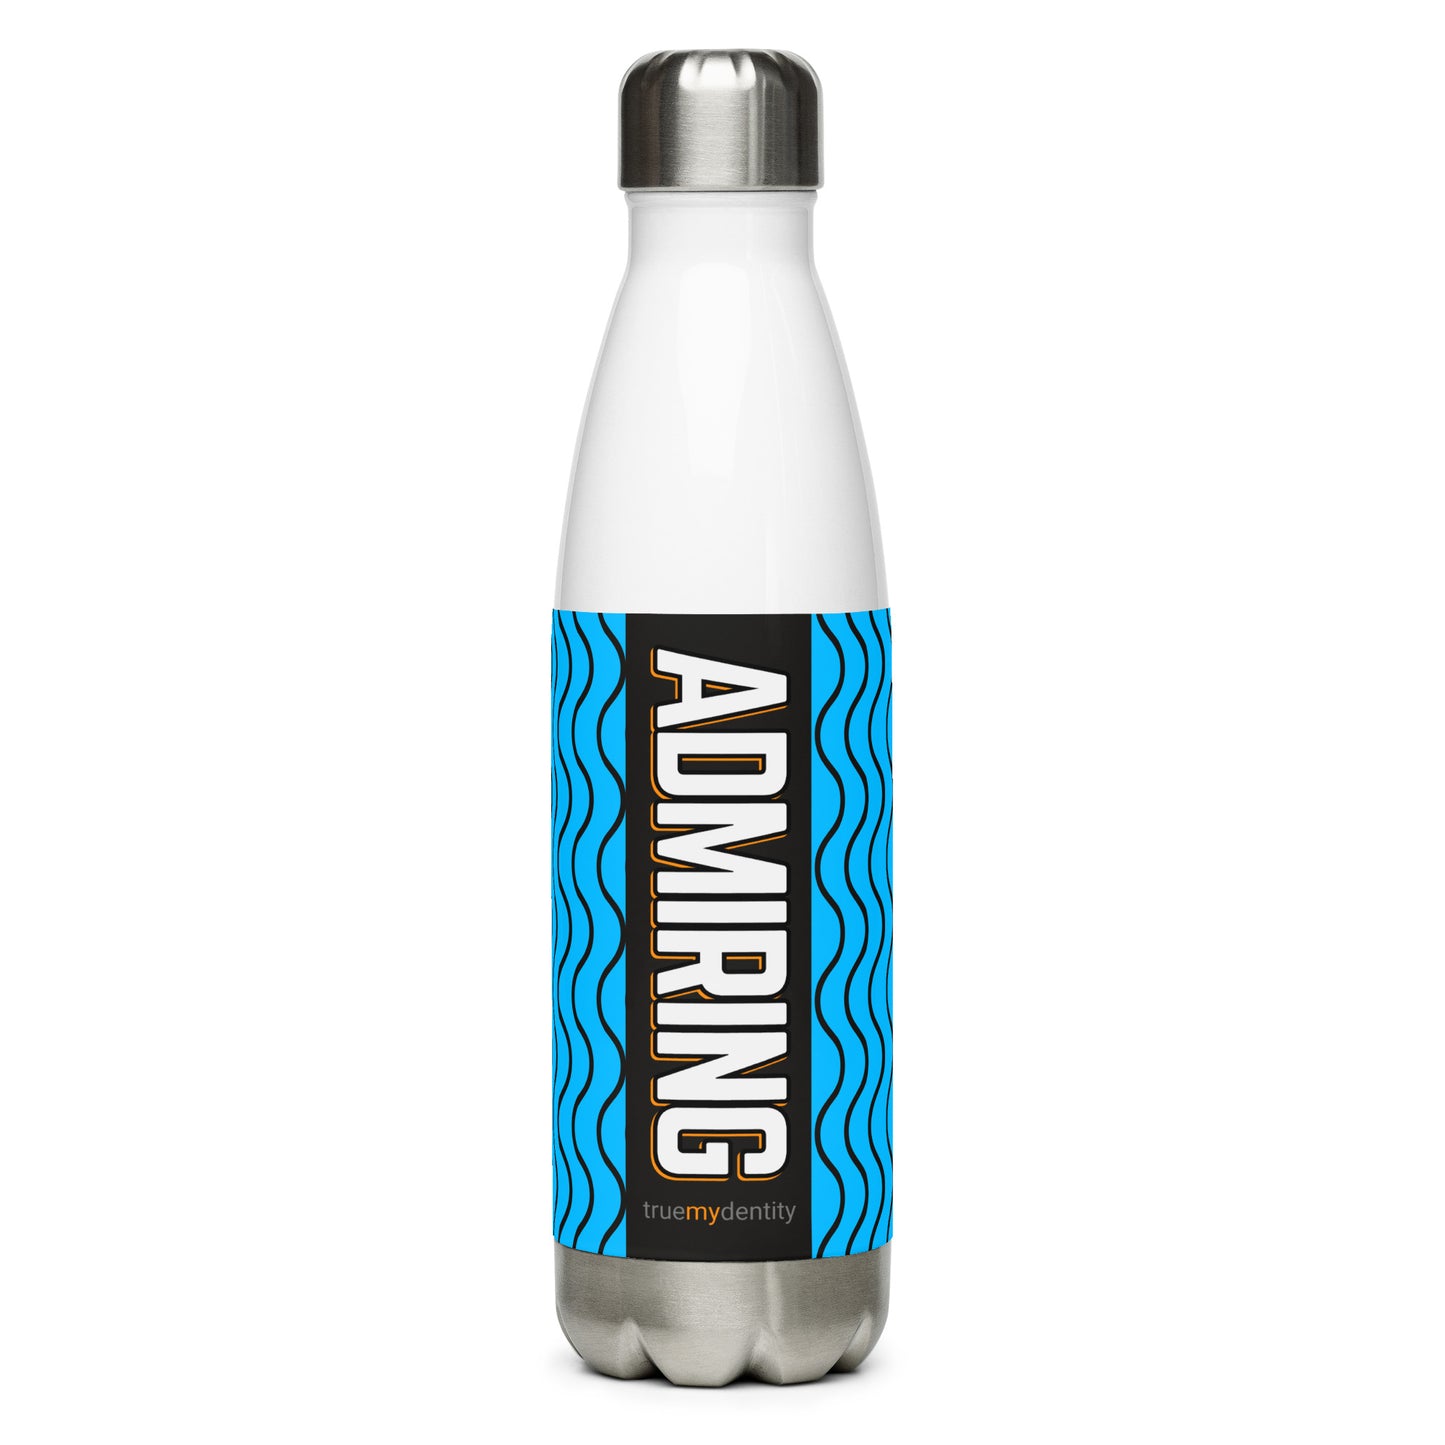 ADMIRING Stainless Steel Water Bottle Blue Wave Design, 17 oz, in Black or White